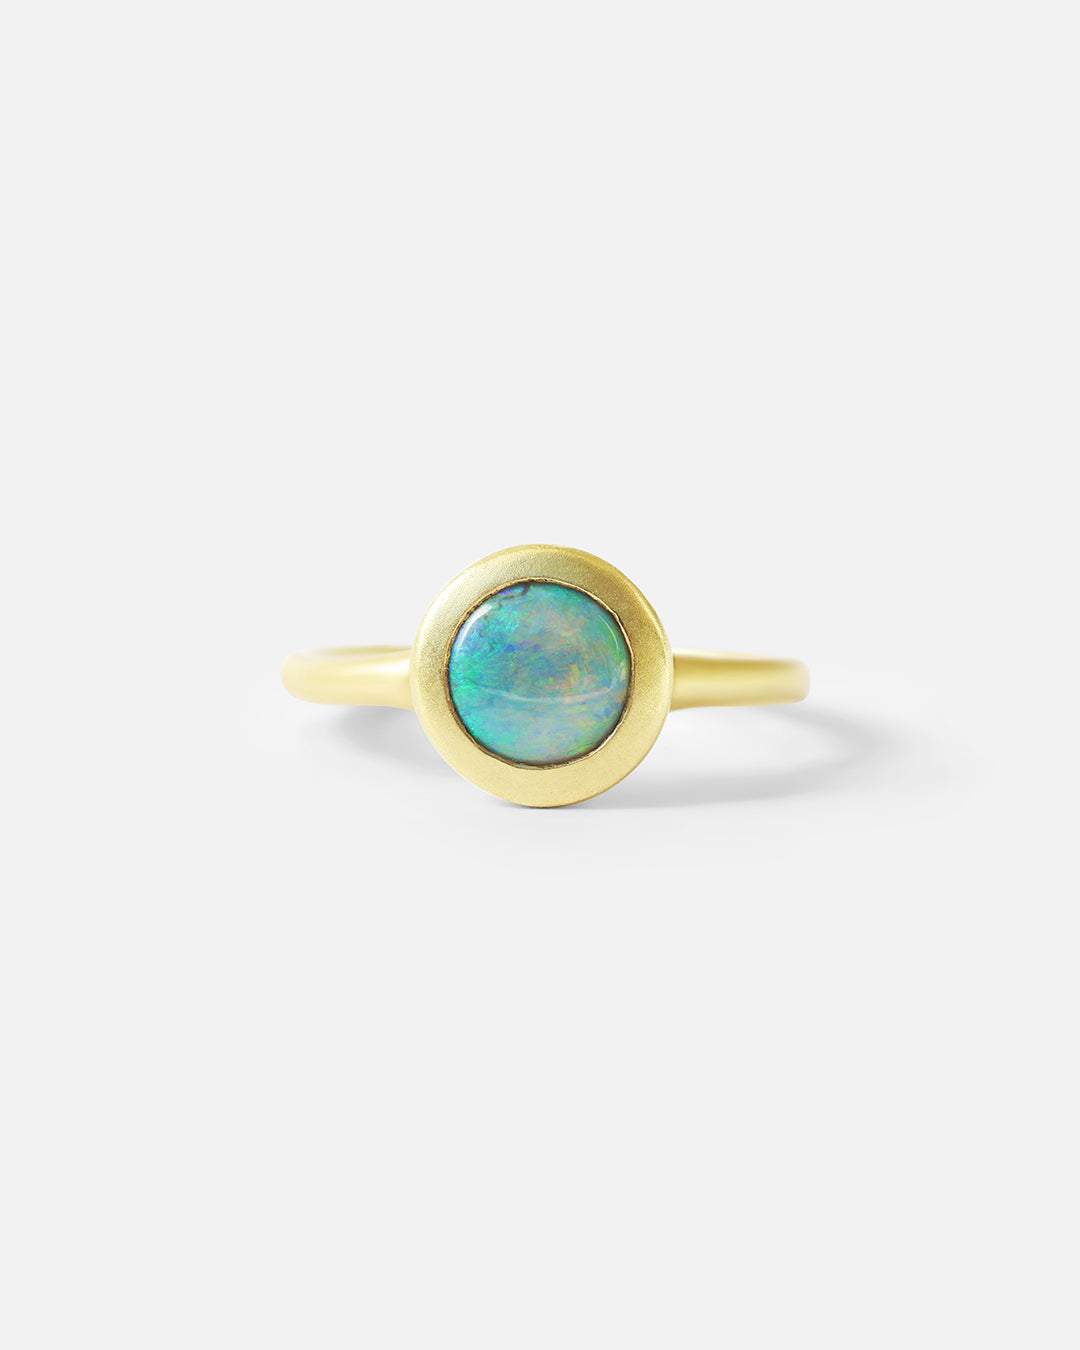 Nugget / Crystal Lighting Ridge Opal Ring By Hiroyo in rings Category